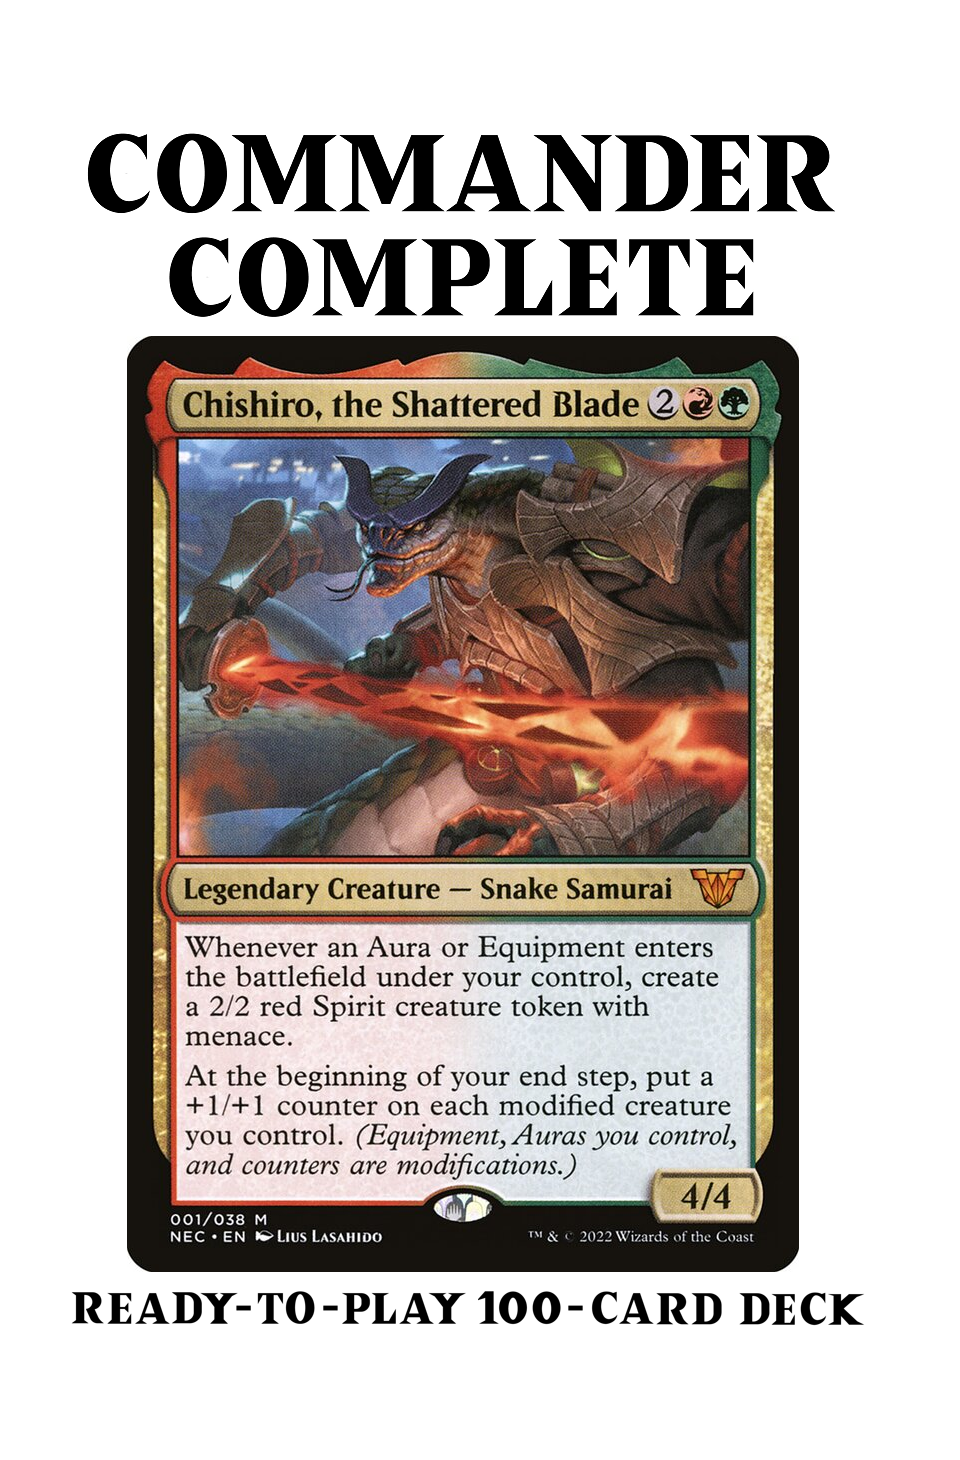 Chishiro, the Scattered Blade Modified Counters Auras Equipment Magic MTG Commander Deck